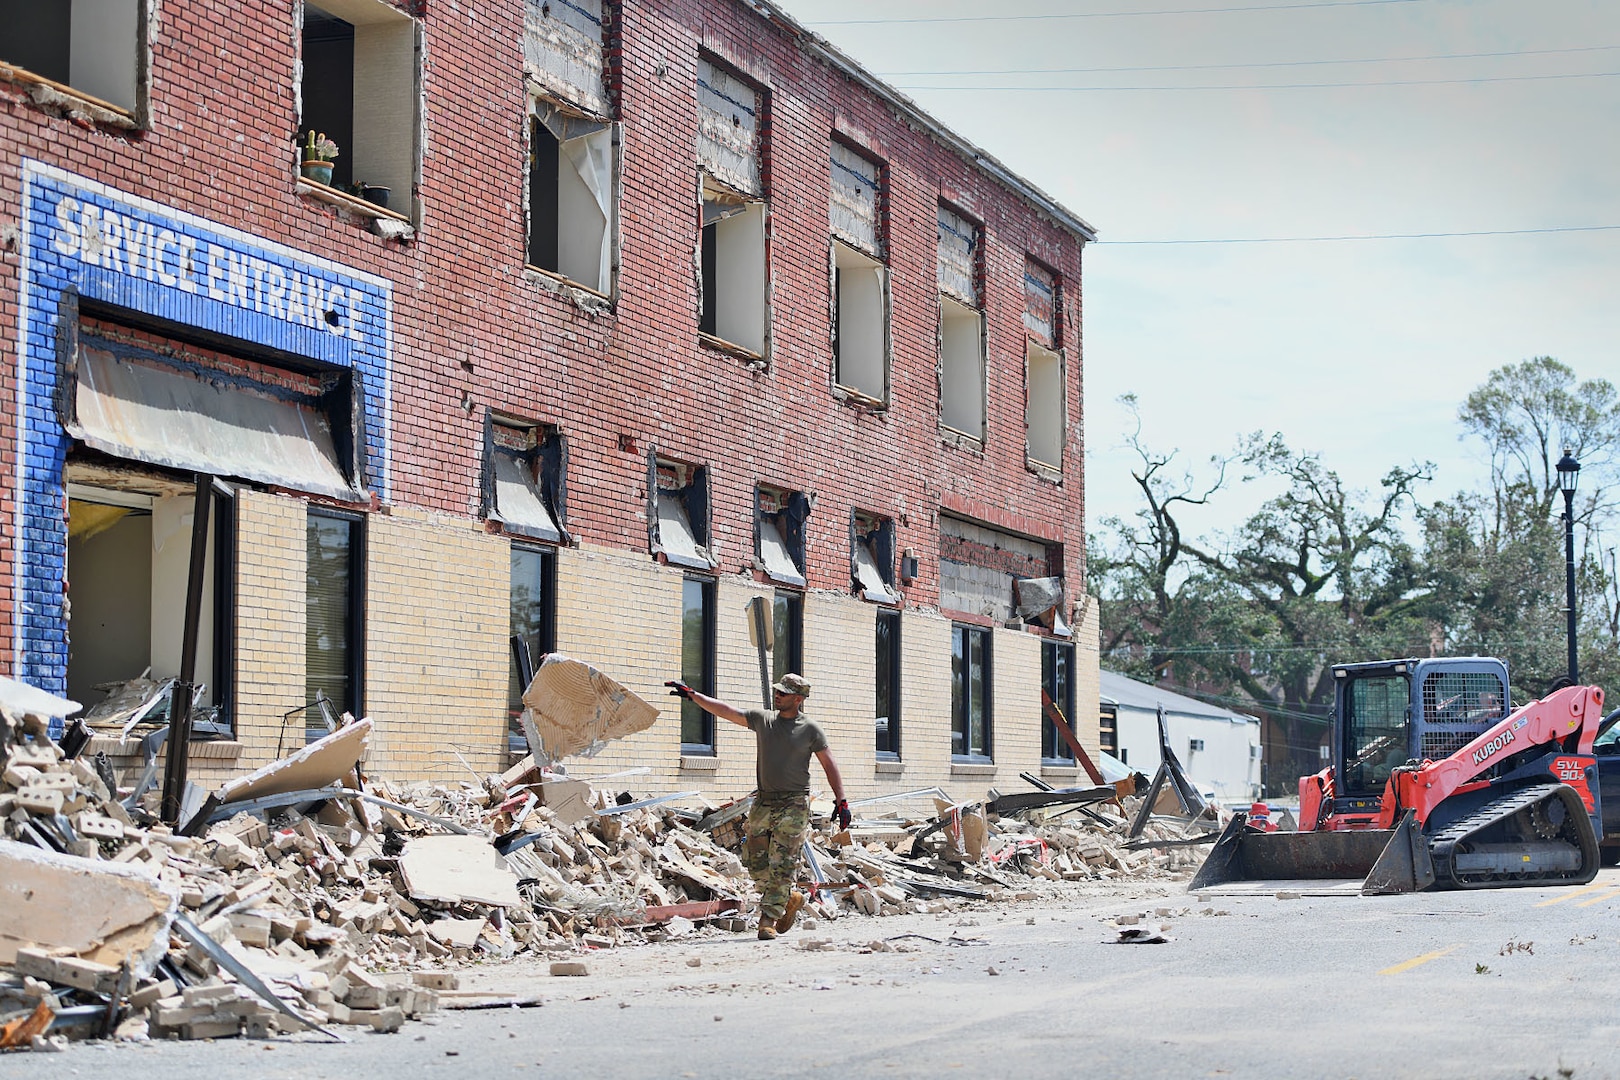 Airmen from the 159th Civil Engineering’s Debris Clearance Package clear rubble from a road in downtown Lake Charles, Louisiana, Aug. 30, 2020. The Louisiana Air National Guard Airmen arrived with heavy equipment after Hurricane Laura’s landfall to clear roadways of the hardest-hit areas in and round Calcasieu Parish.